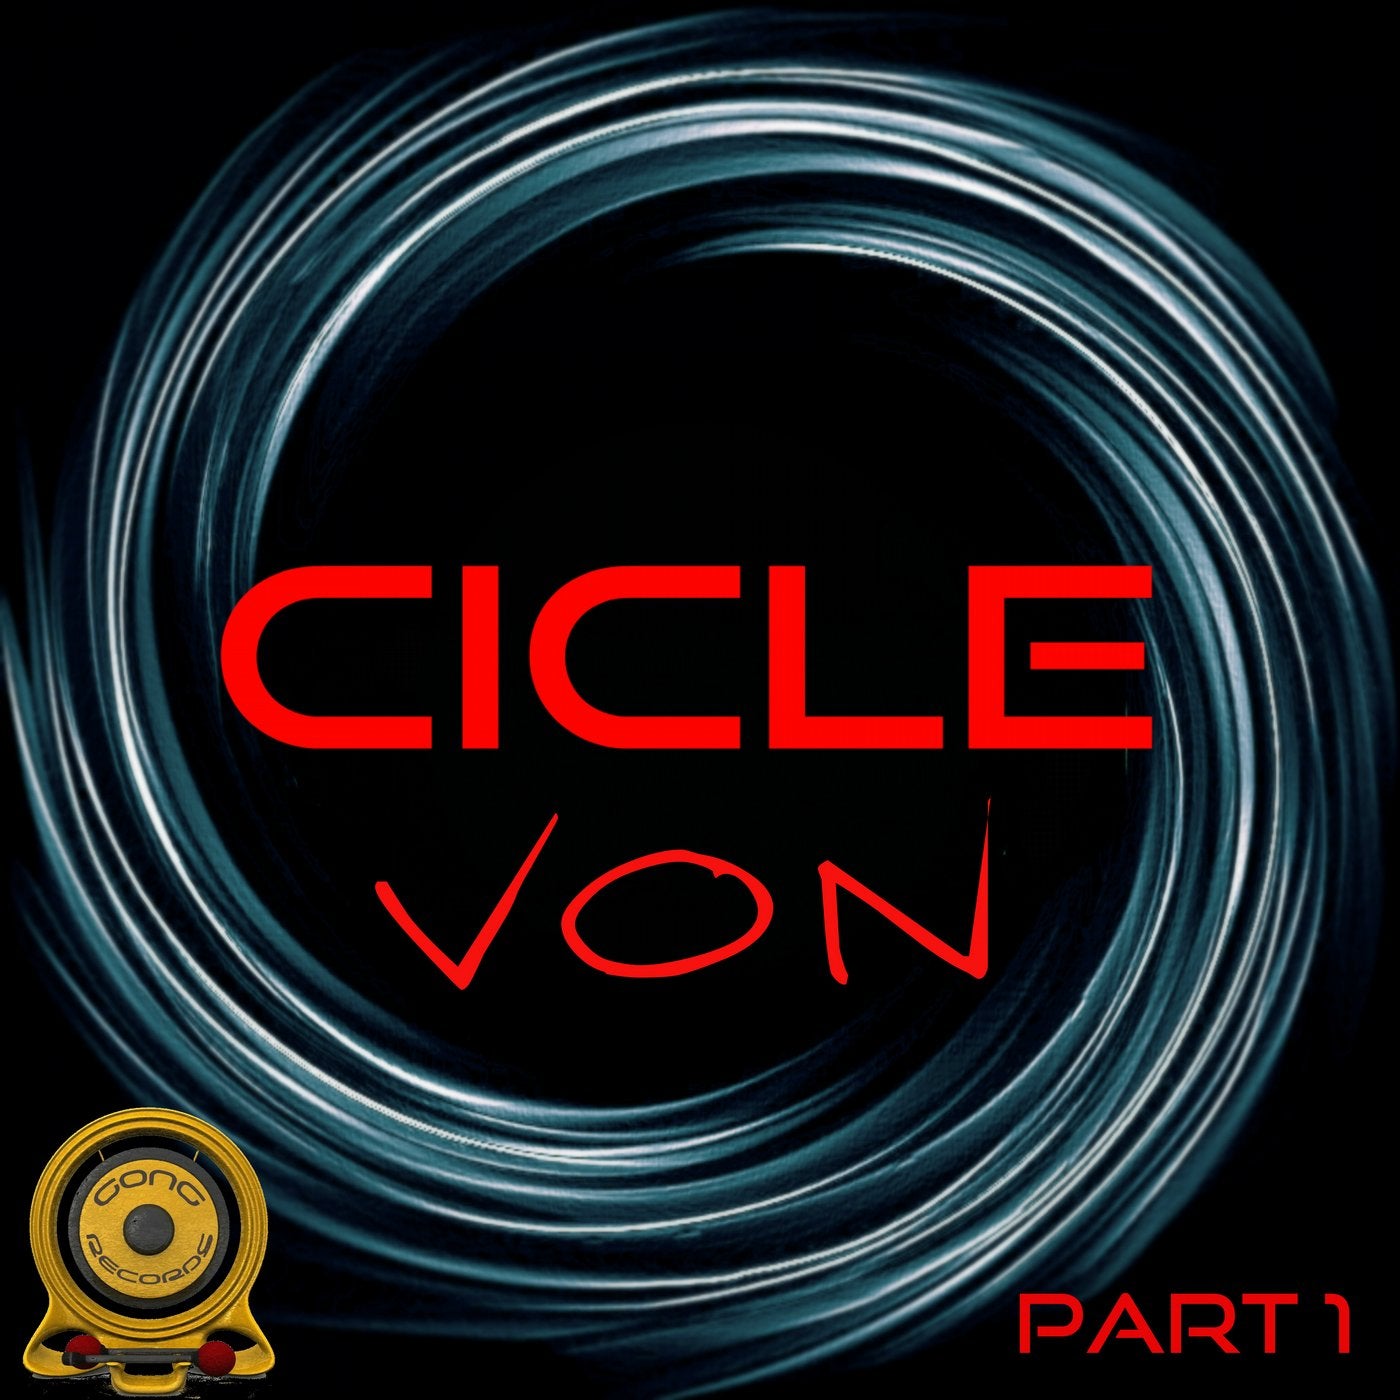 Cicle, Pt. 1